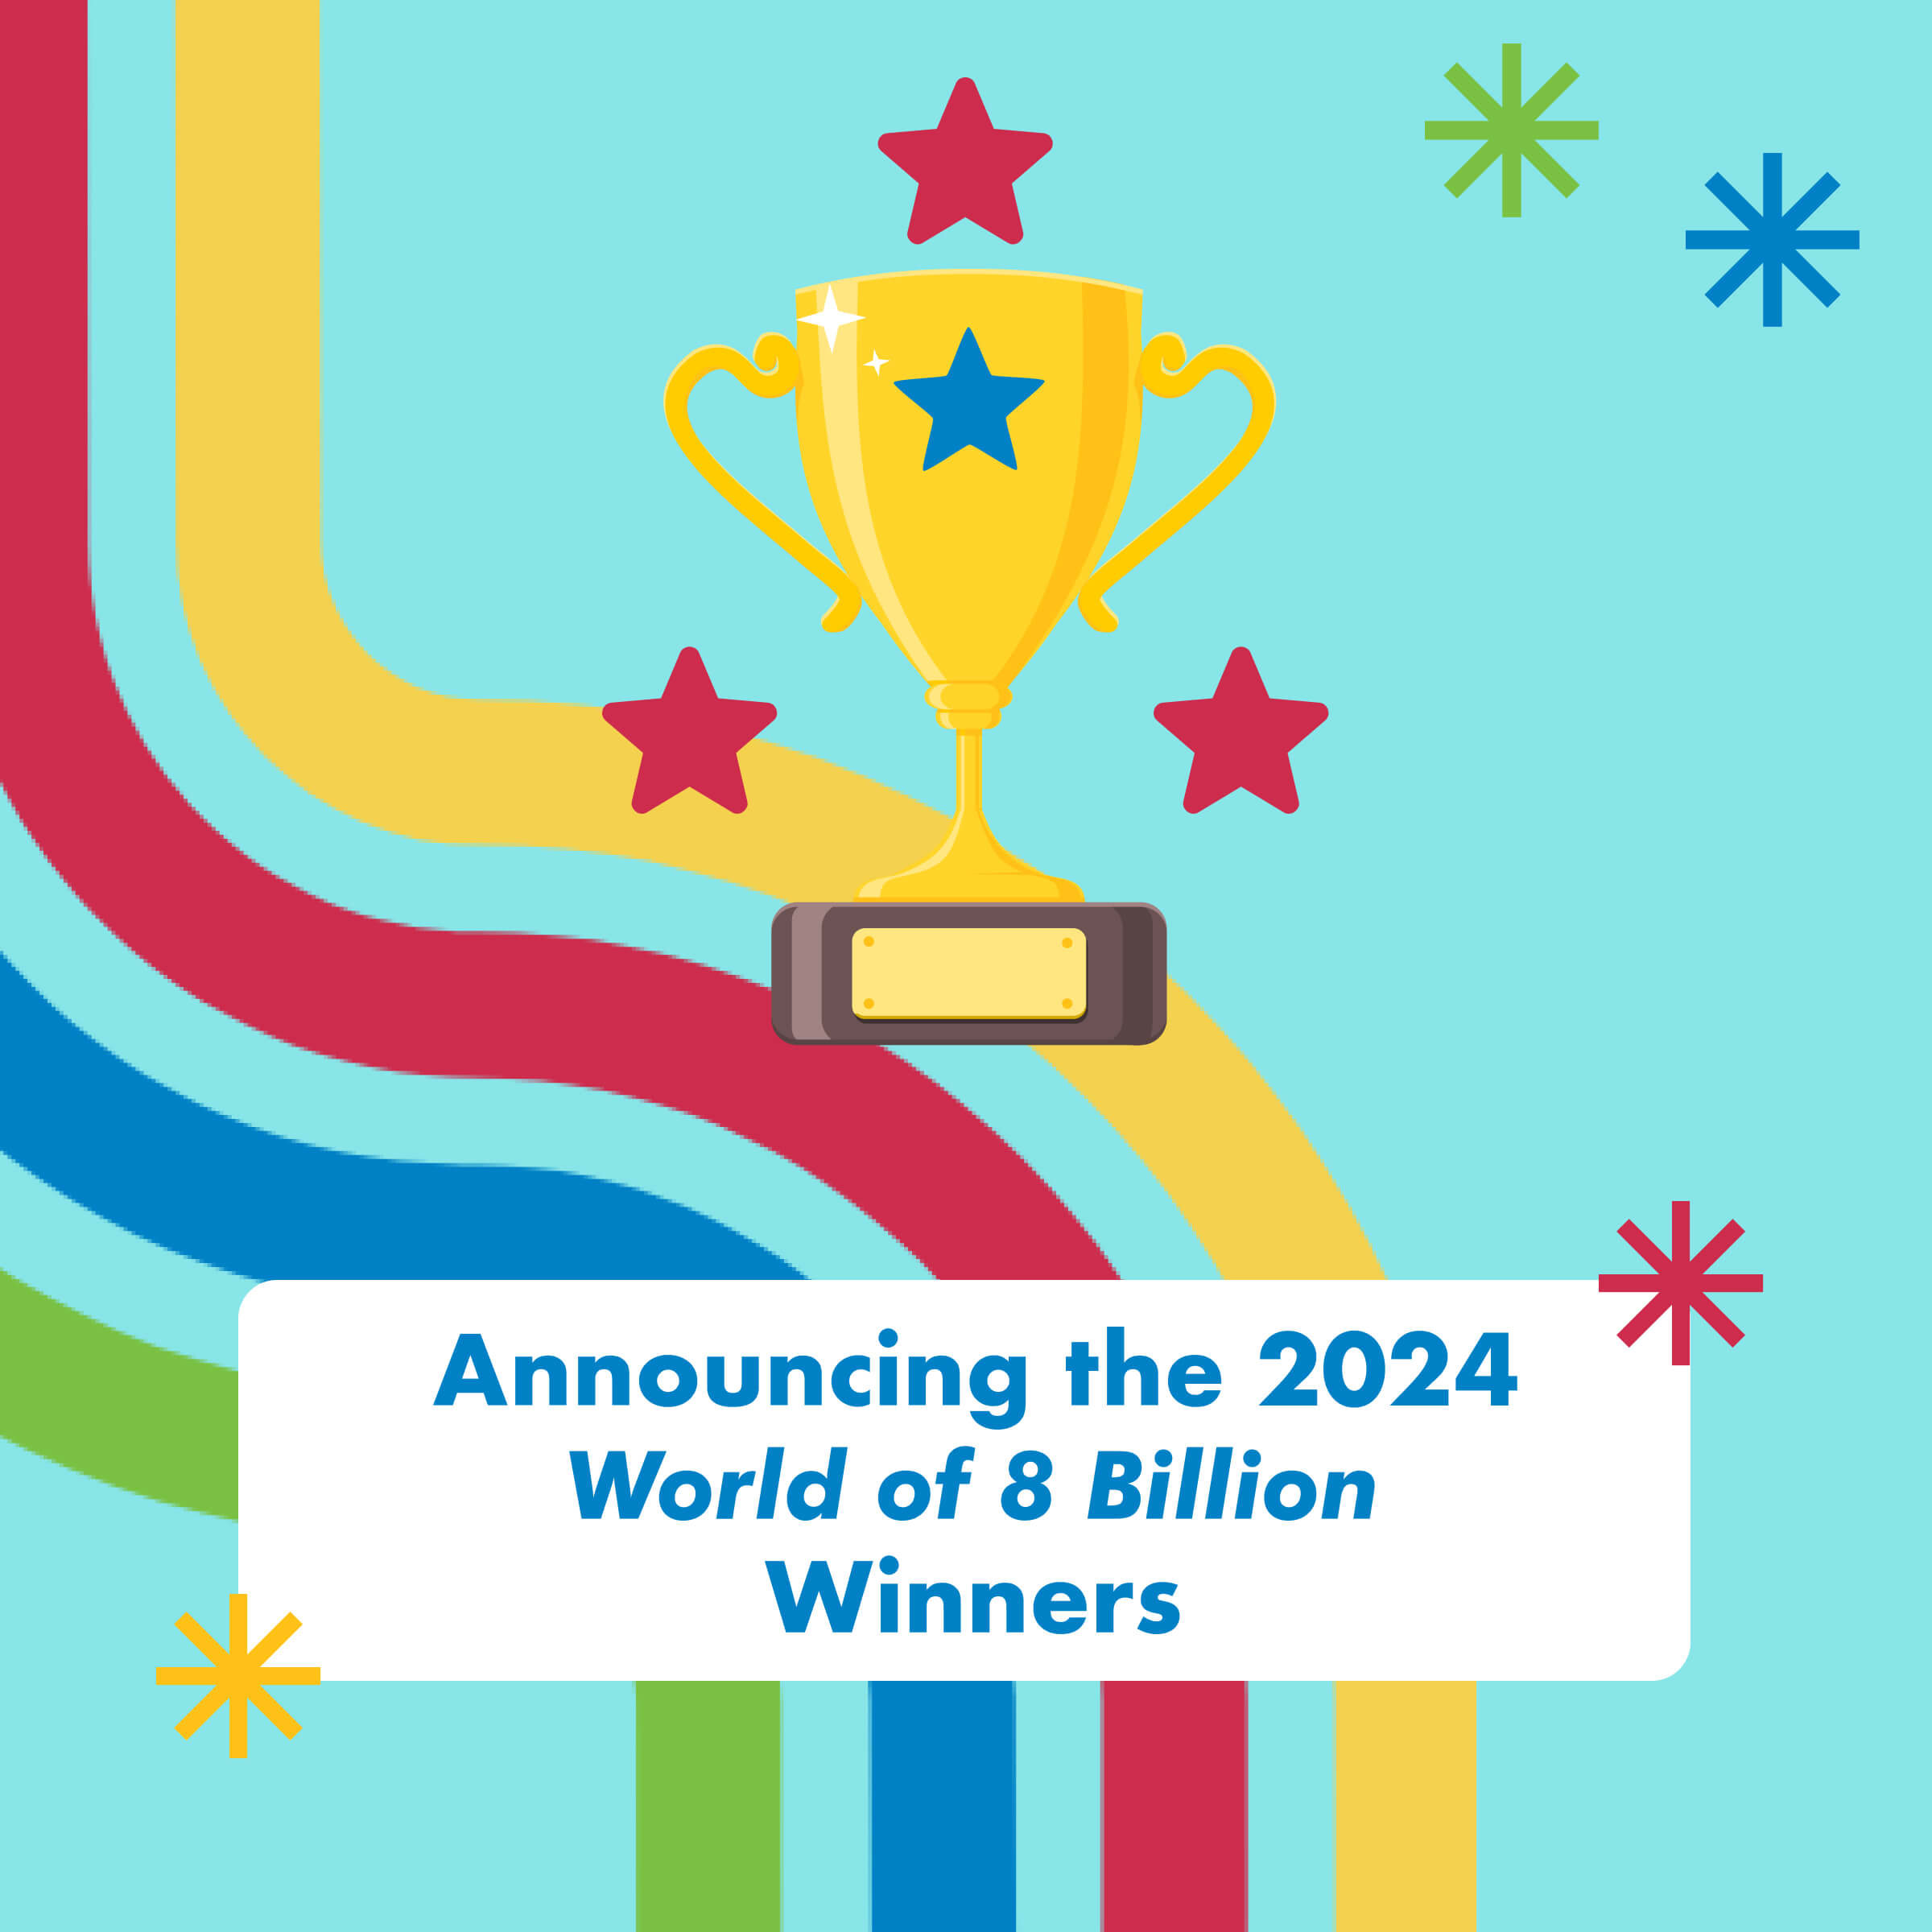 Announcing the World of 8 Billion Winners graphic